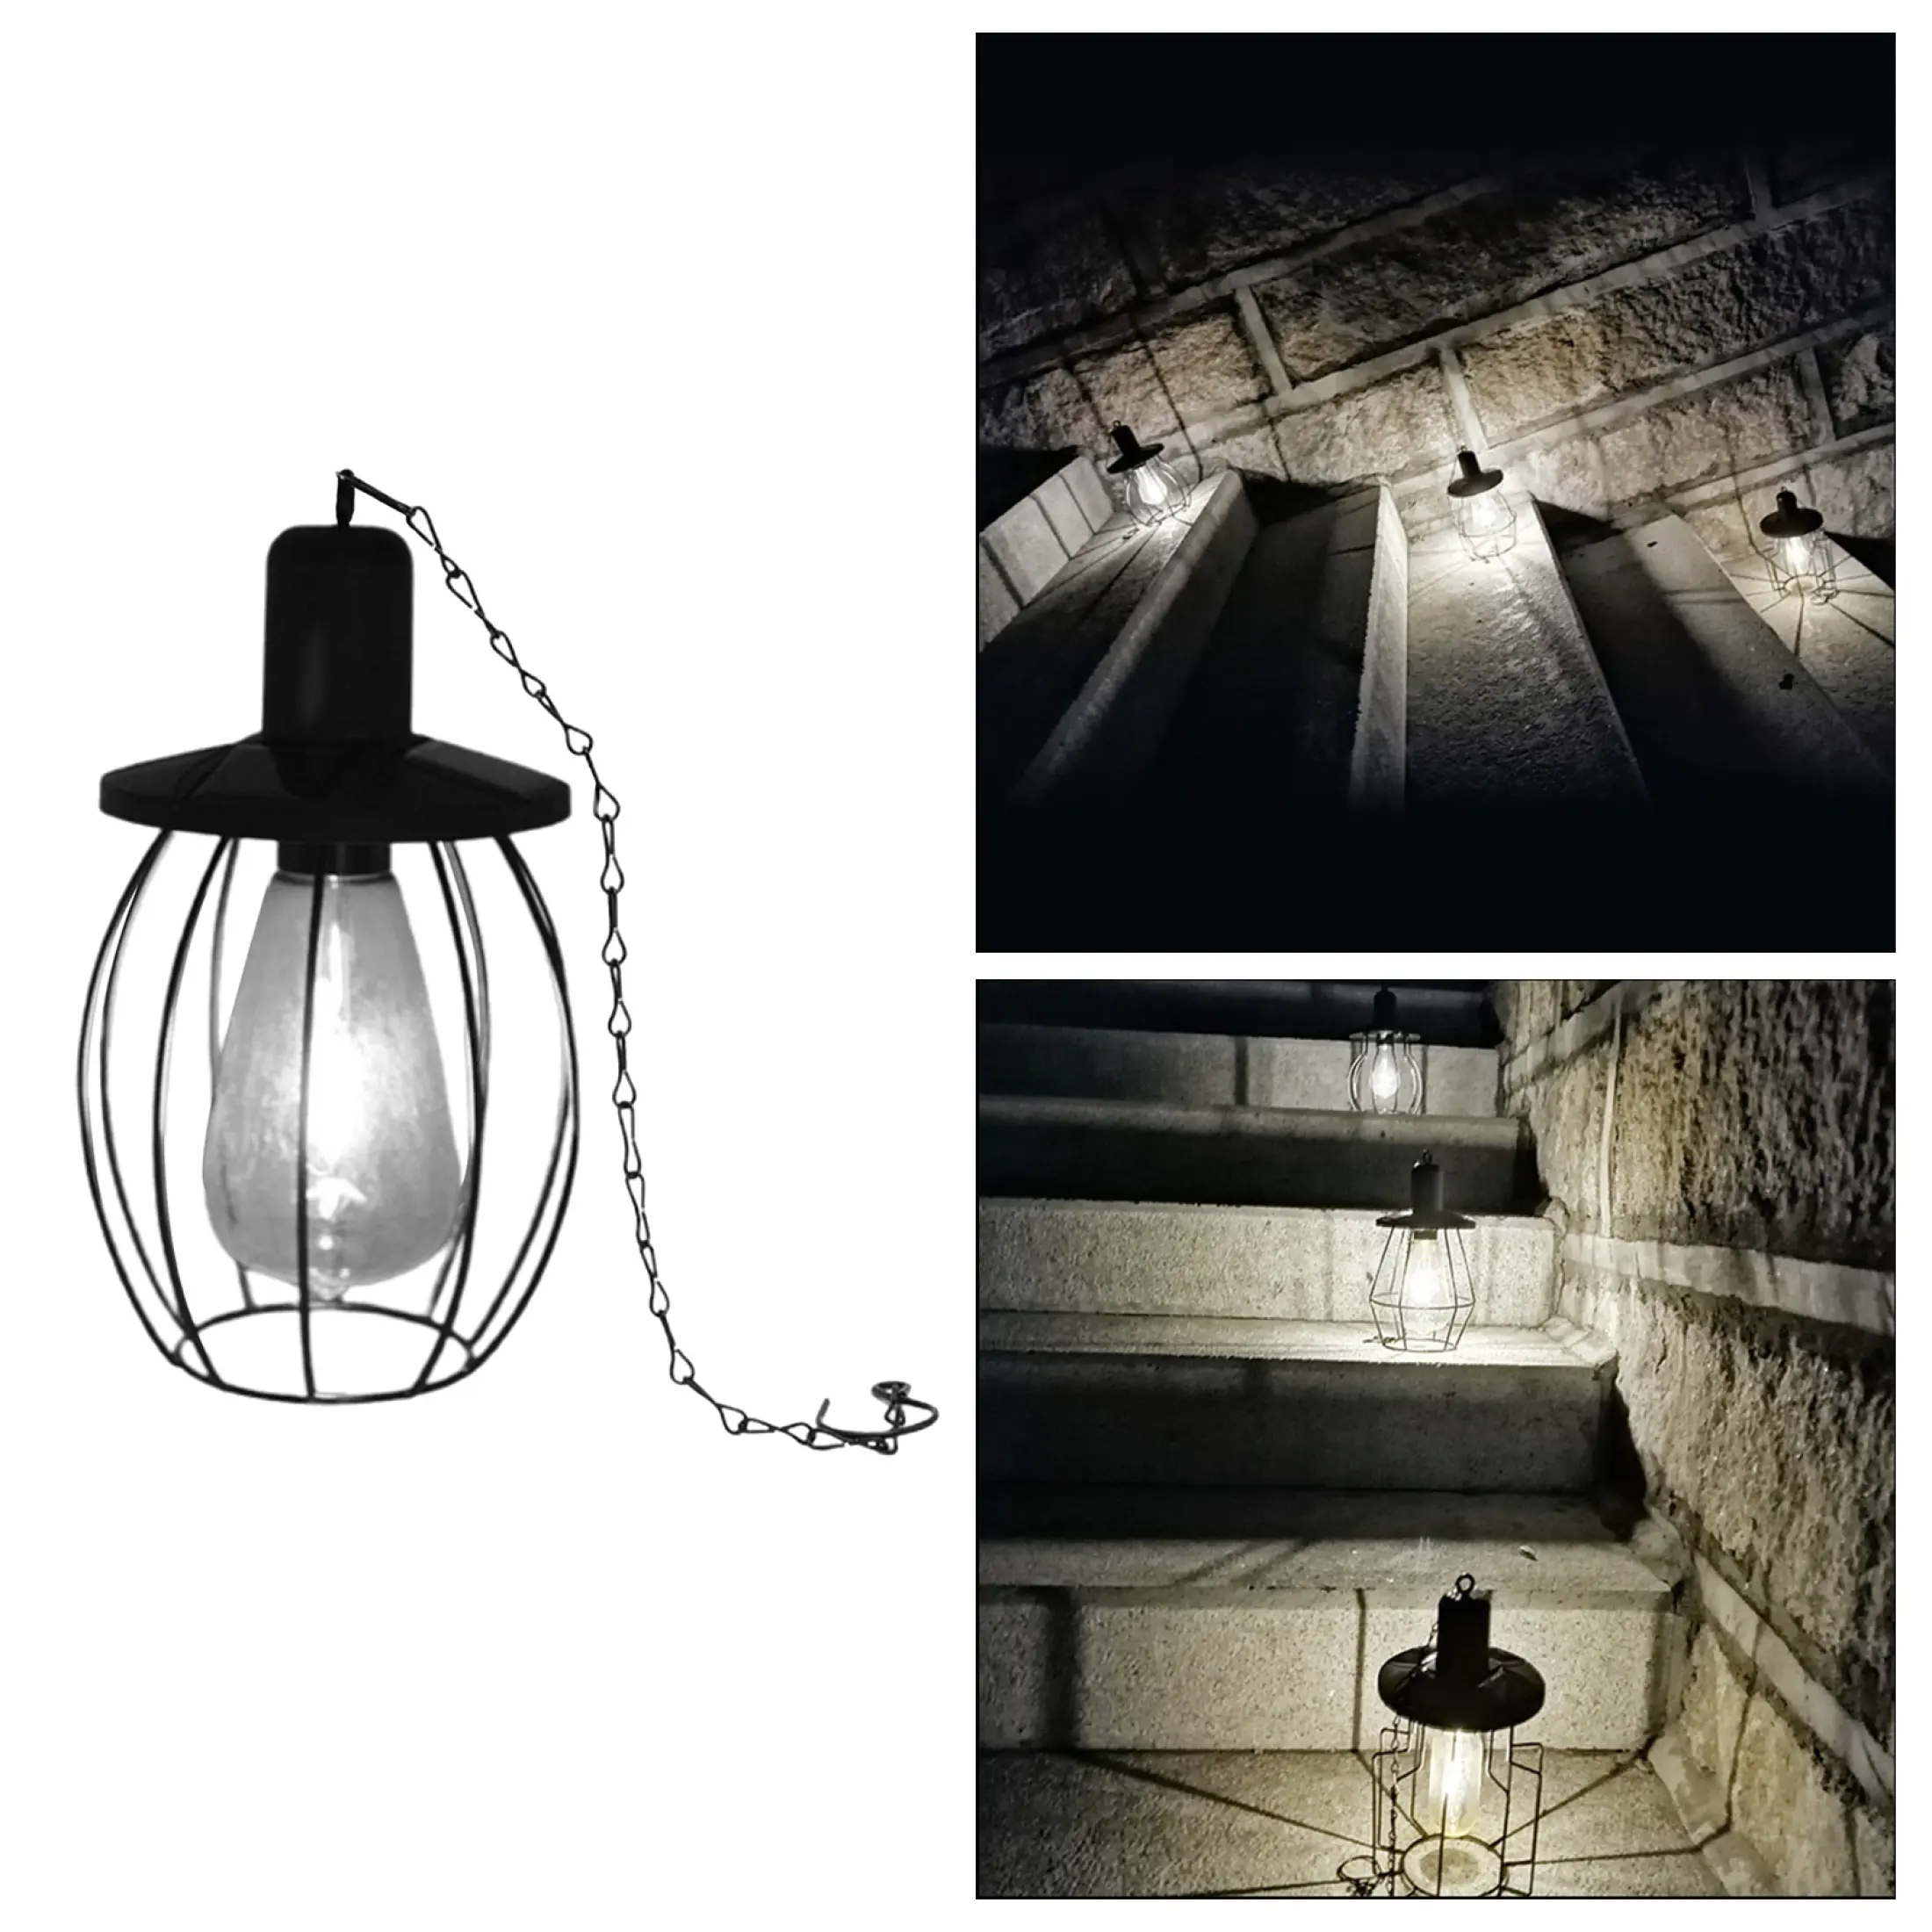 Fityle Retro Solar Ceiling Light Decorative Garden Lawn Yard Led Pendant Lights Cage Cover Powered Lamp Waterproof Save Energy For Outdoor Backyard Lazada Ph - Ceiling Light Outdoor Waterproof Cover